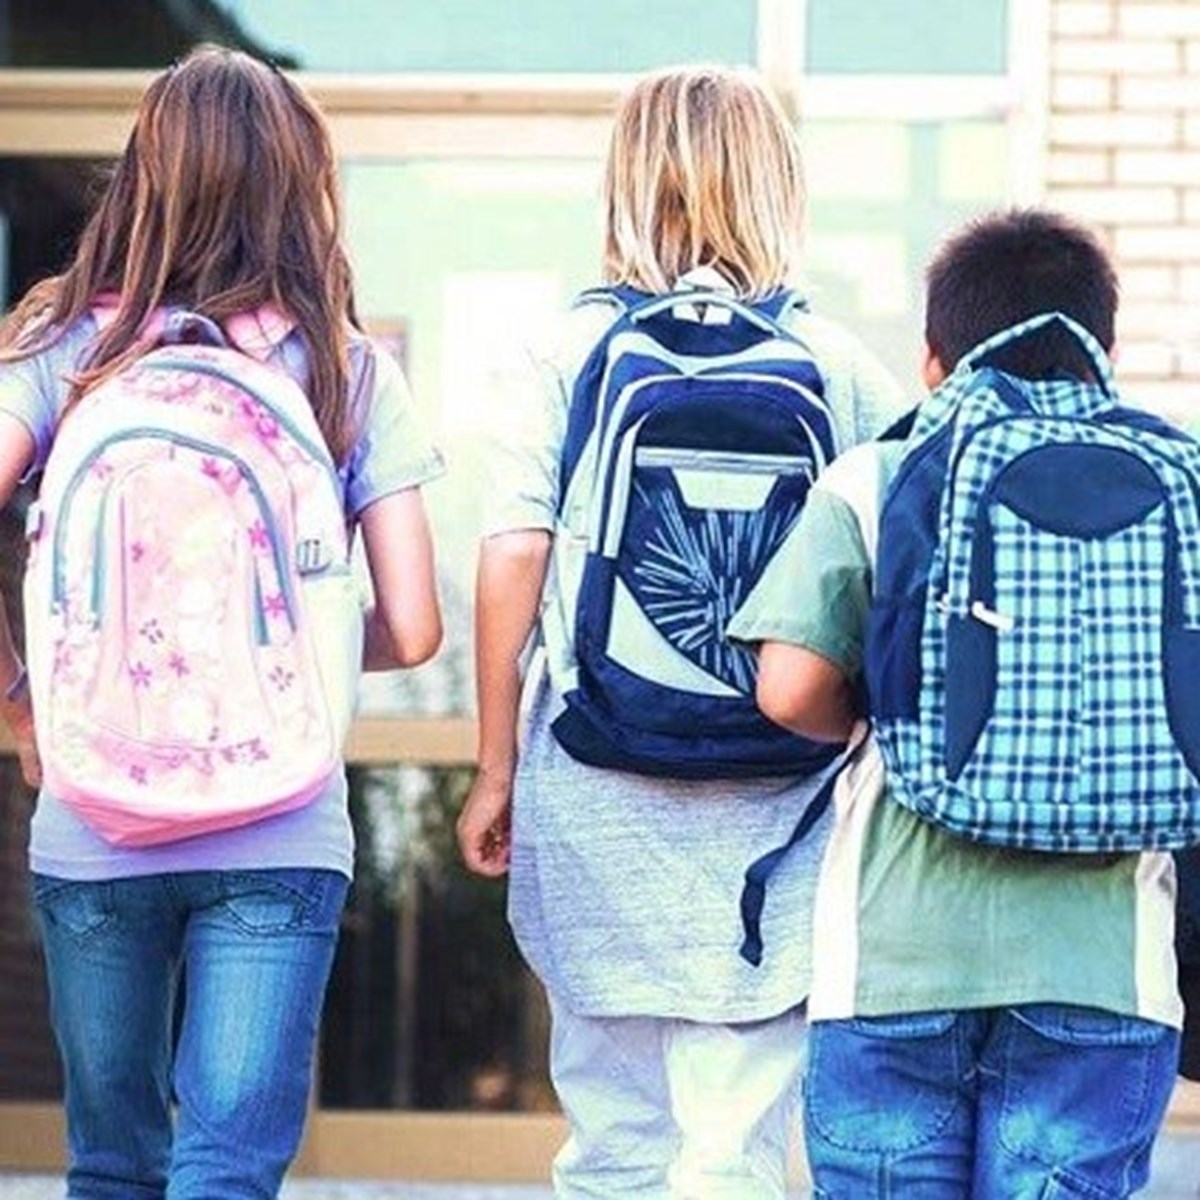 Weigh your backpack before heading off to school